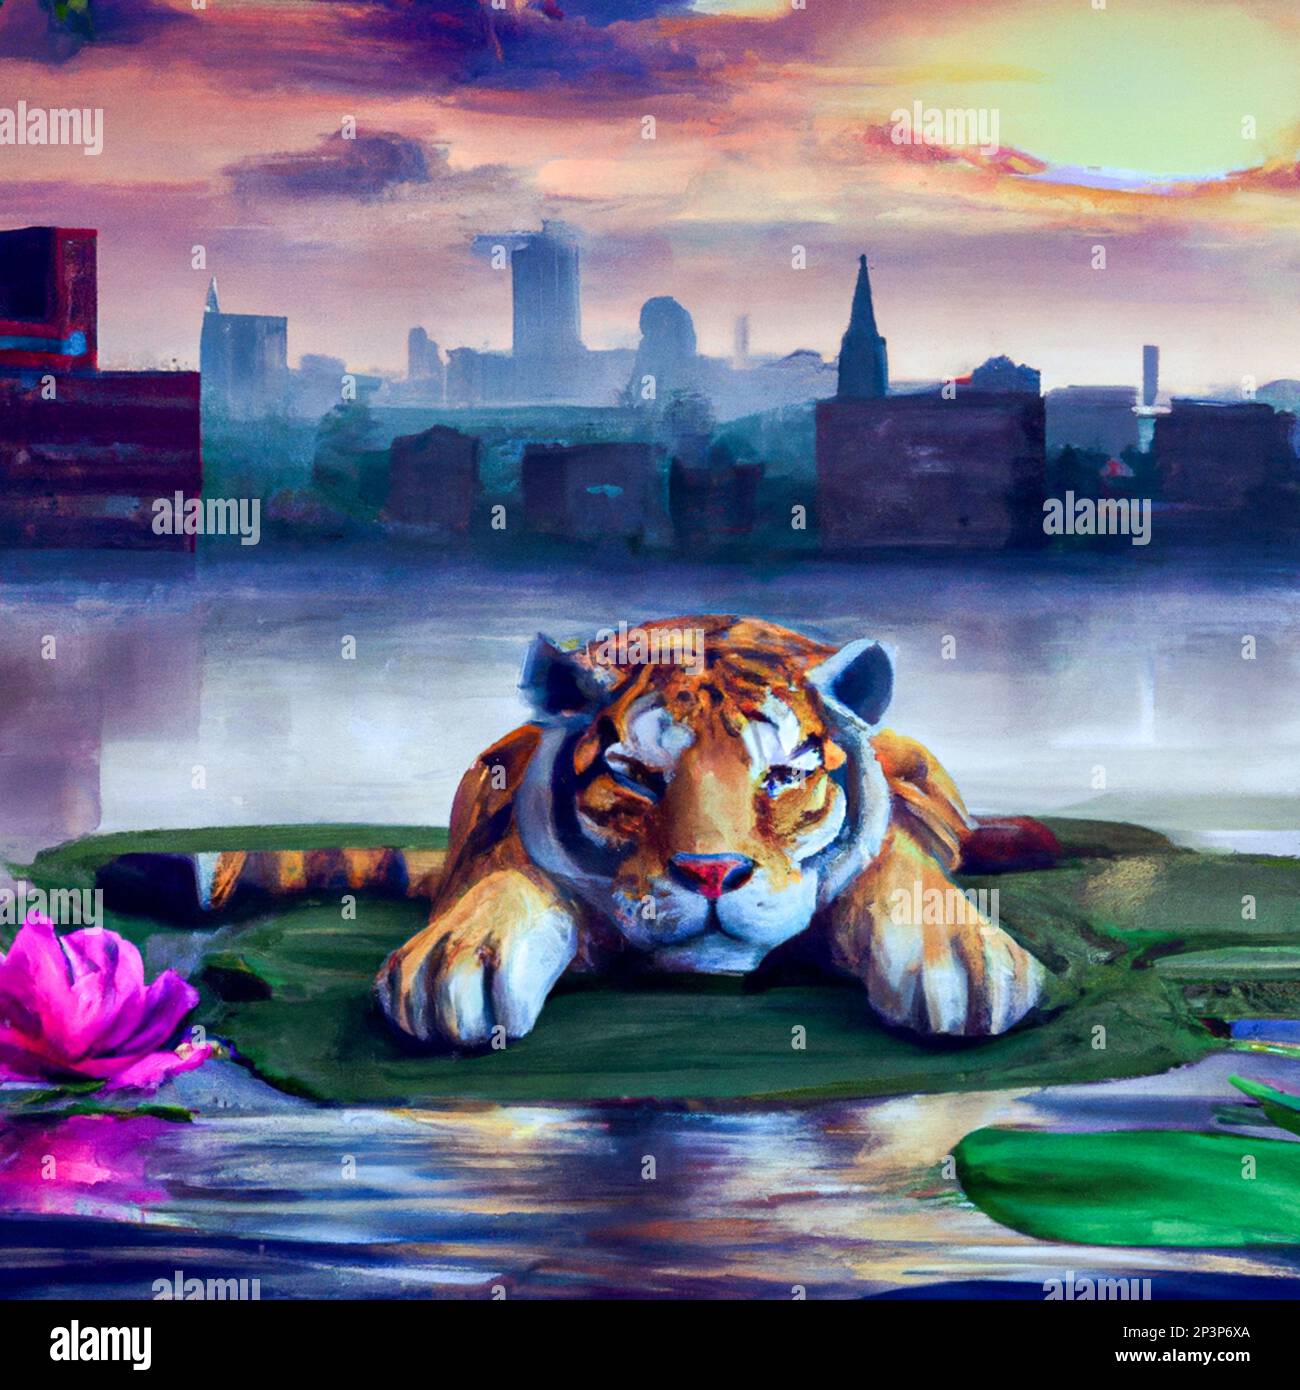 Digital illustration of wild animals. In a big city to illustrate the threats on biodiversity and fauna and flora on the occasion of the United Nations Conference on Biodiversity (COP 15) in Montreal. Image created via an artificial intelligence program by Martin Bertrand and then edited. France. Stock Photo